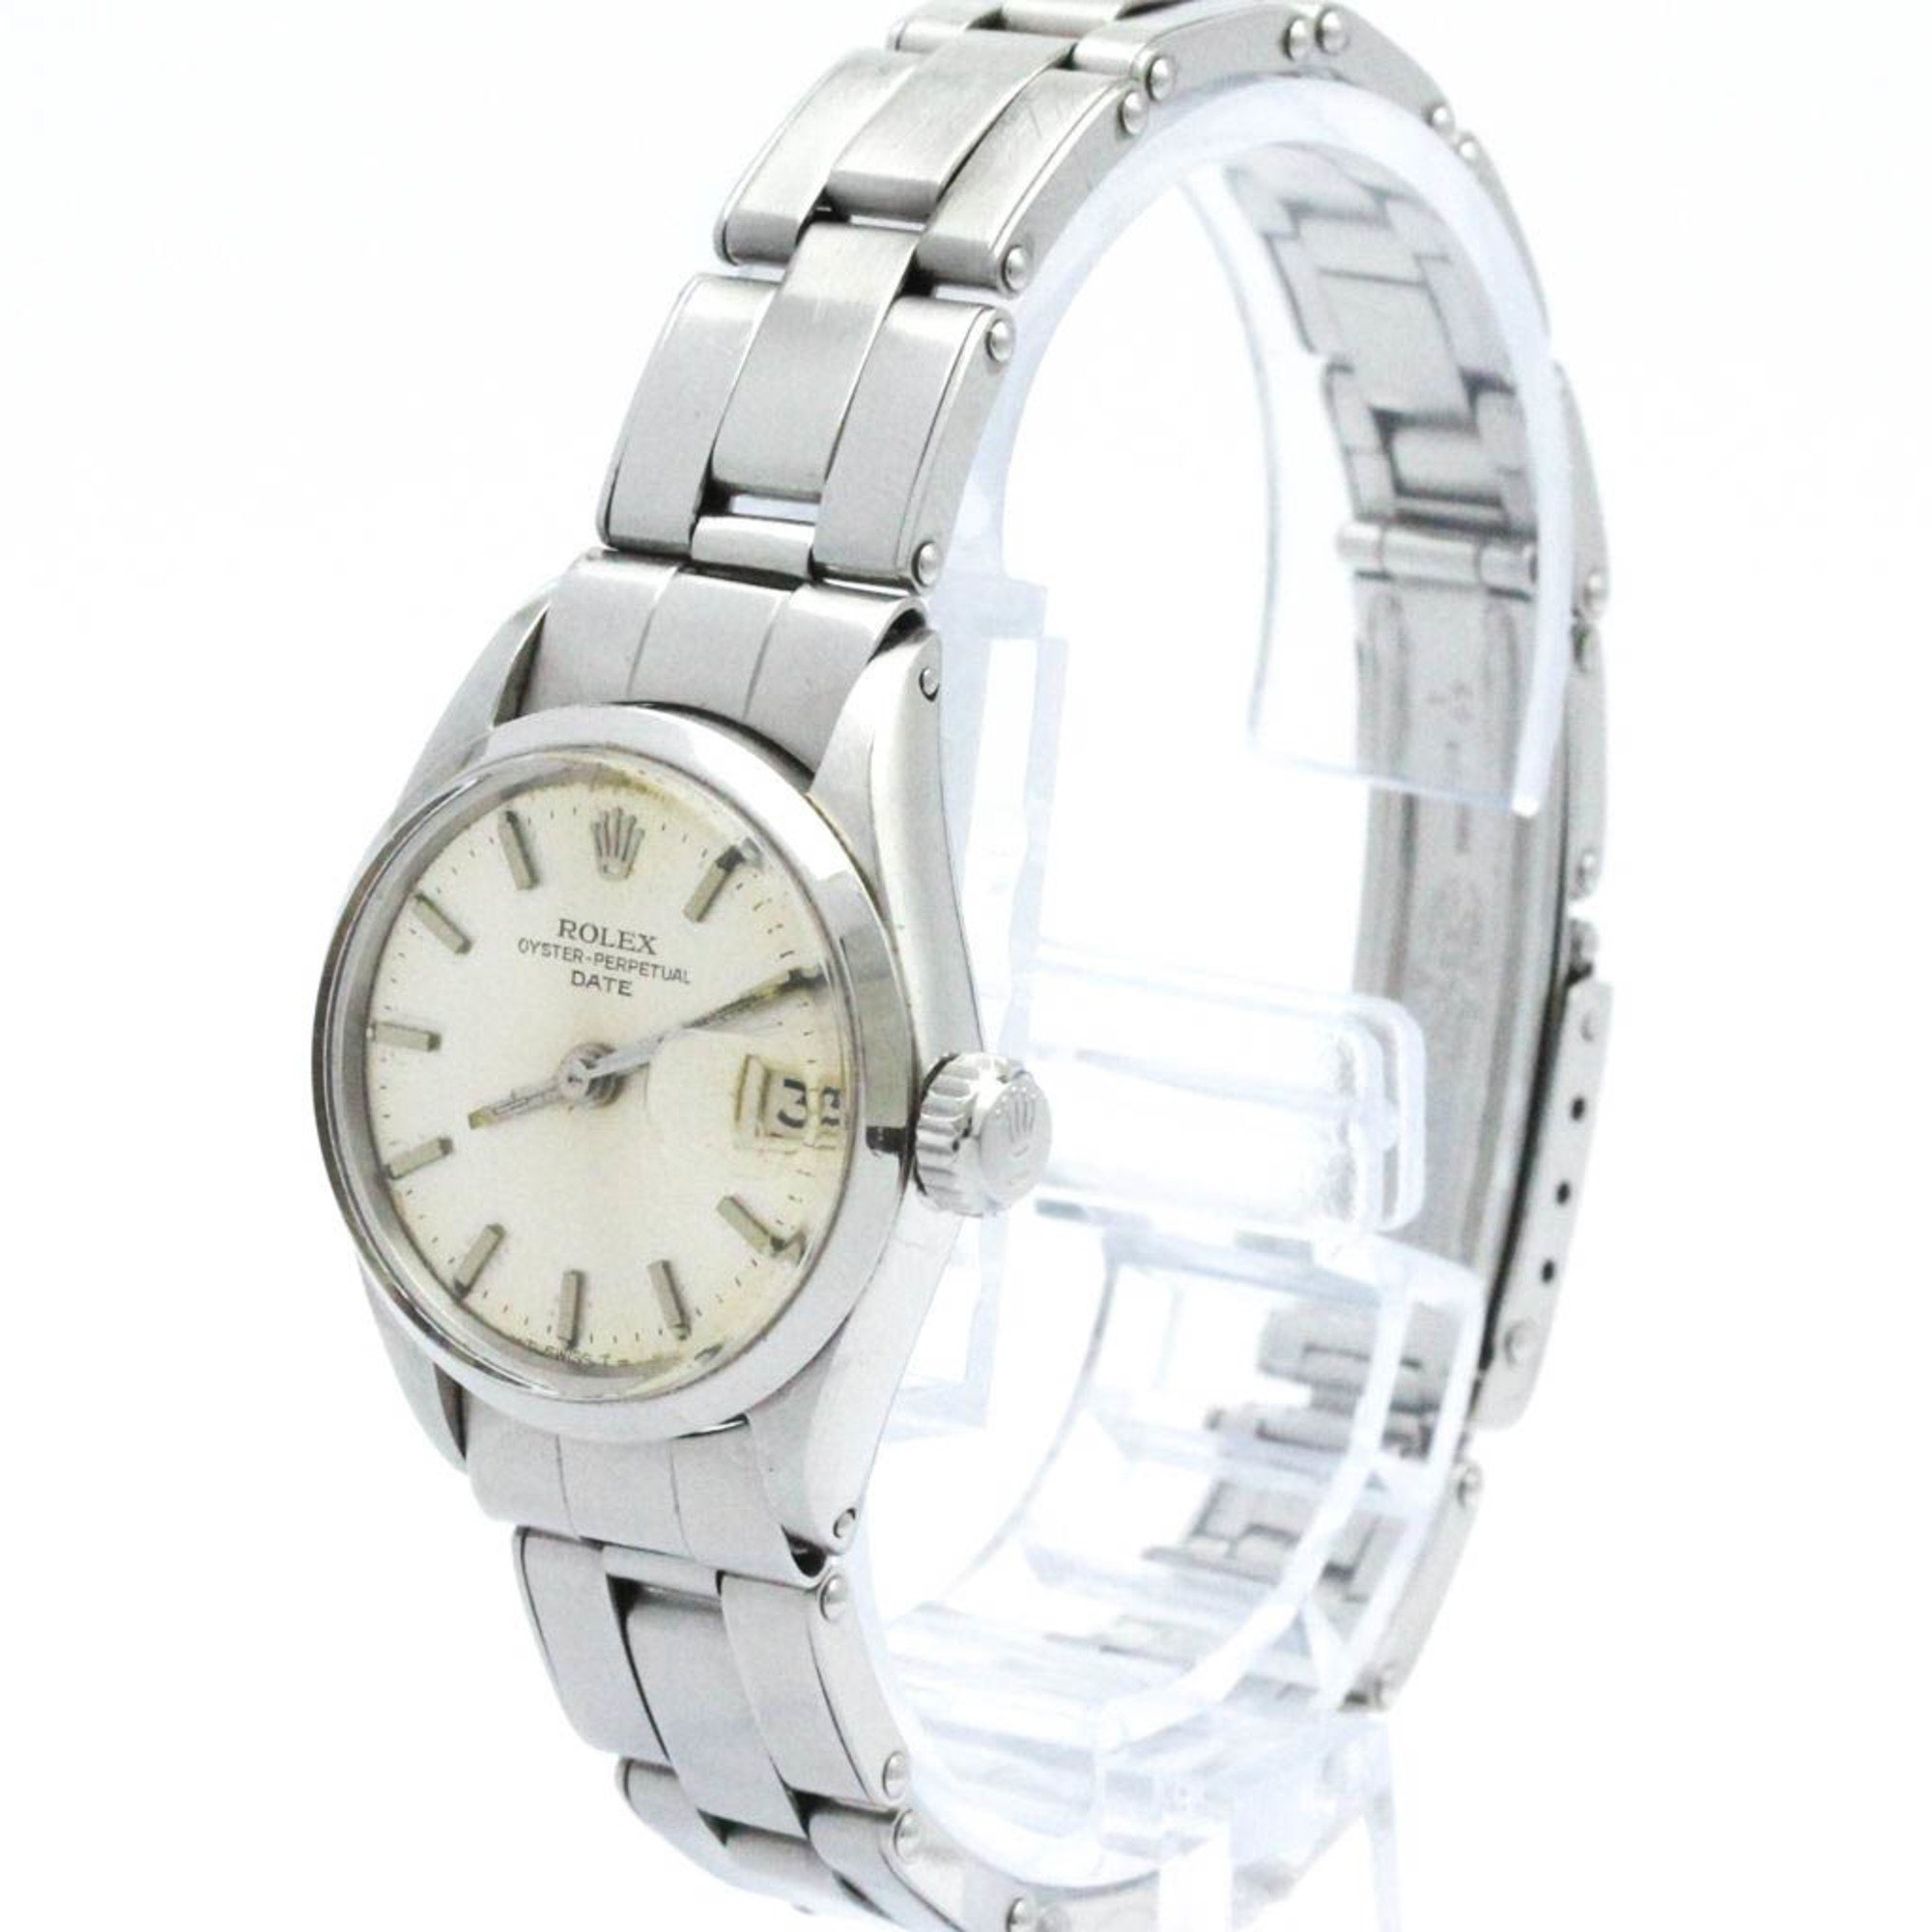 Vintage ROLEX Oyster Perpetual Date 6516 Steel Automatic Ladies Watch BF571635